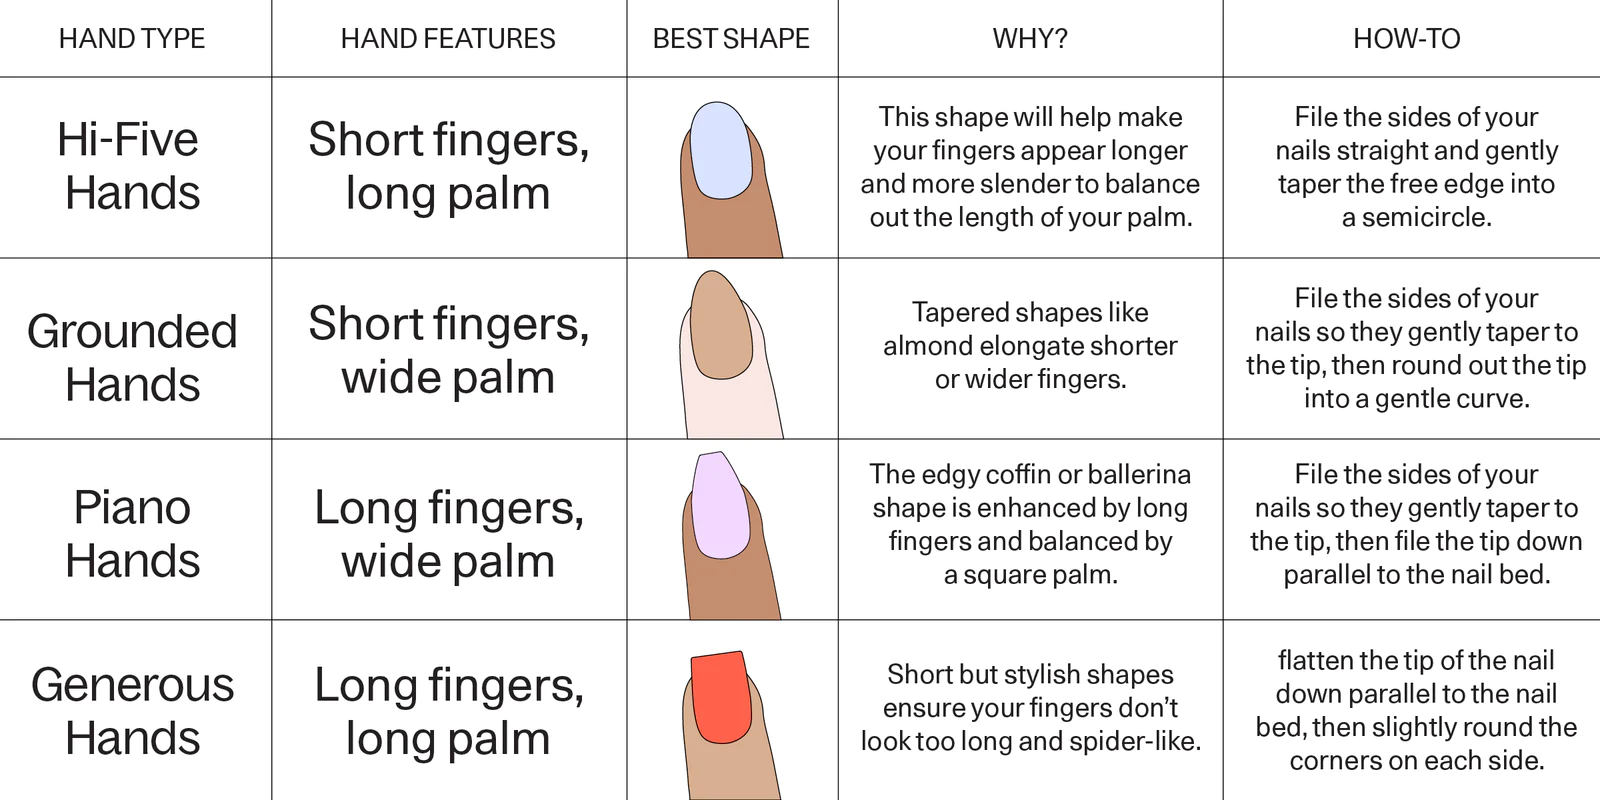 How to File Nails